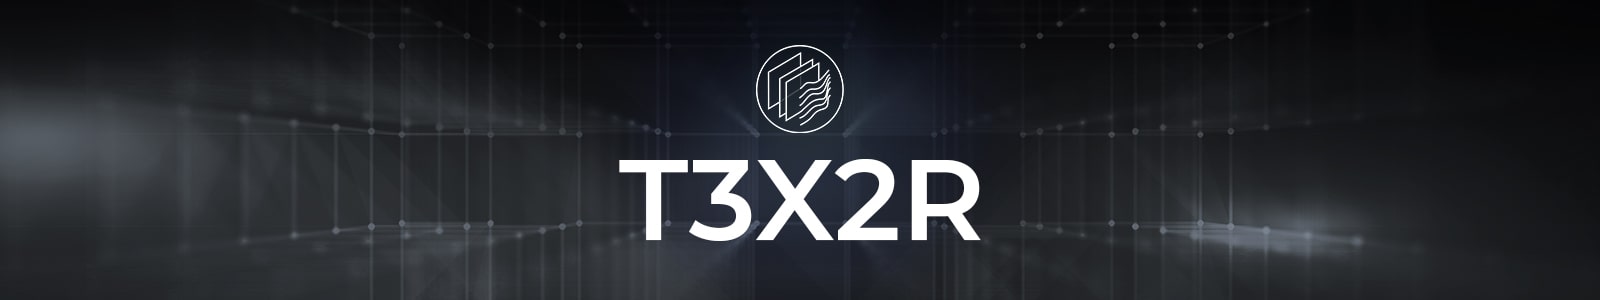 t3xt2r for ableton live